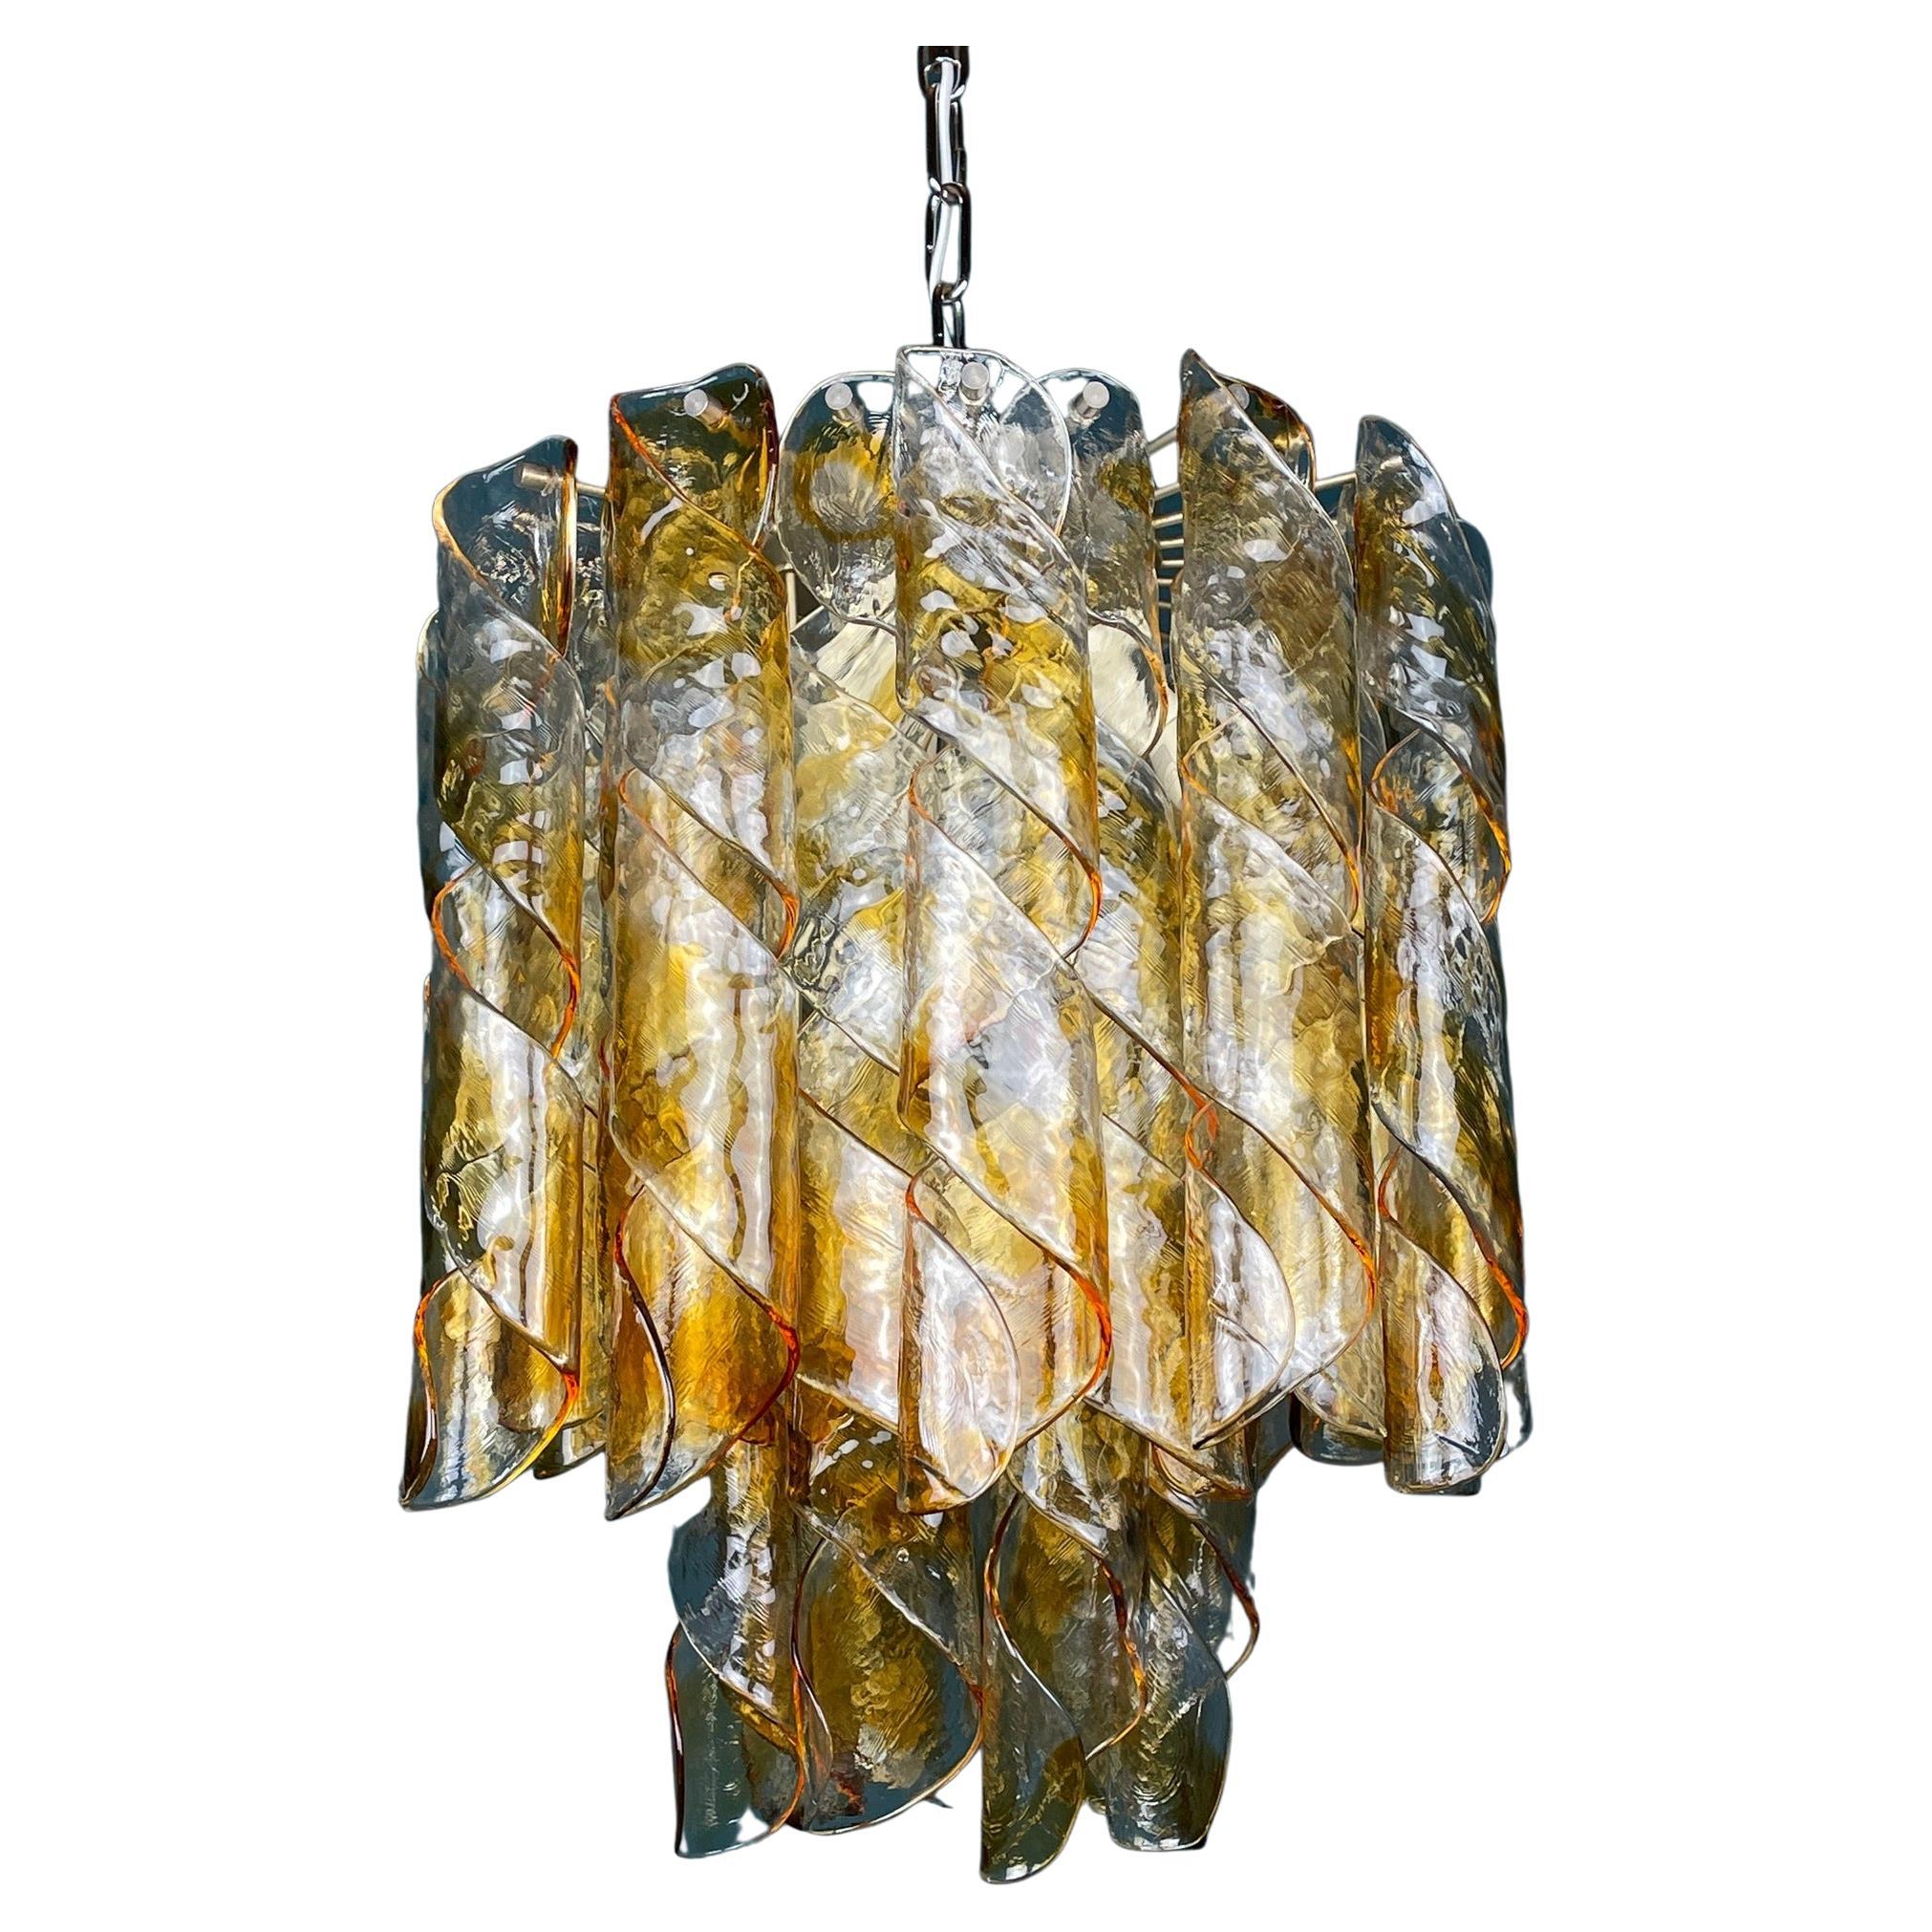 Vintage Large Murano Chandelier "Torciglioni" by Av Mazzega Italy 1970s